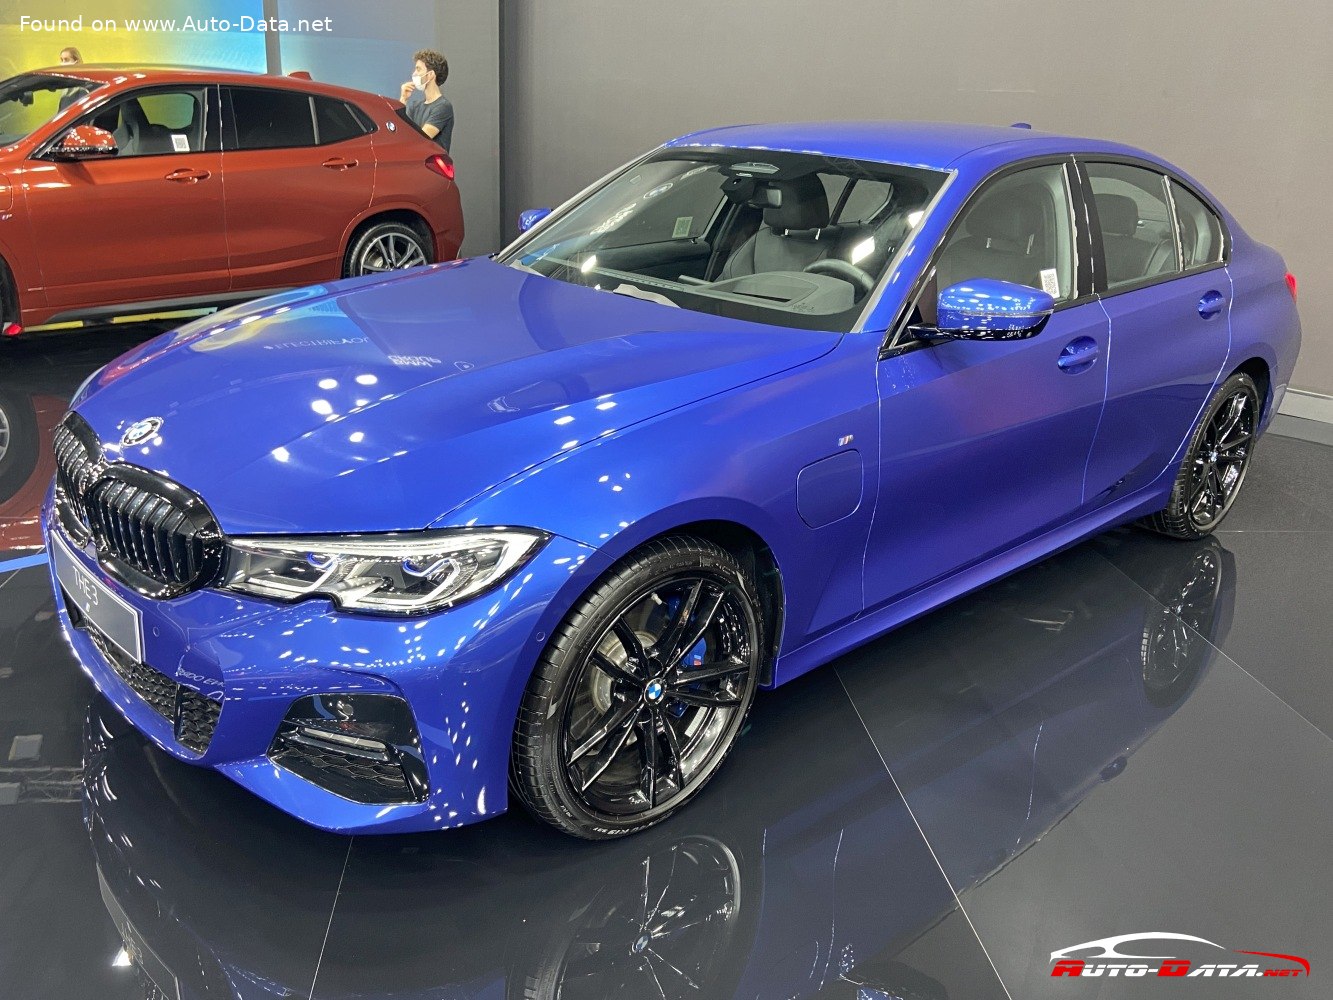 Assortiment ding Tips 2019 BMW 3 Series Sedan (G20) 330e (292 Hp) Plug-in Hybrid Steptronic |  Technical specs, data, fuel consumption, Dimensions